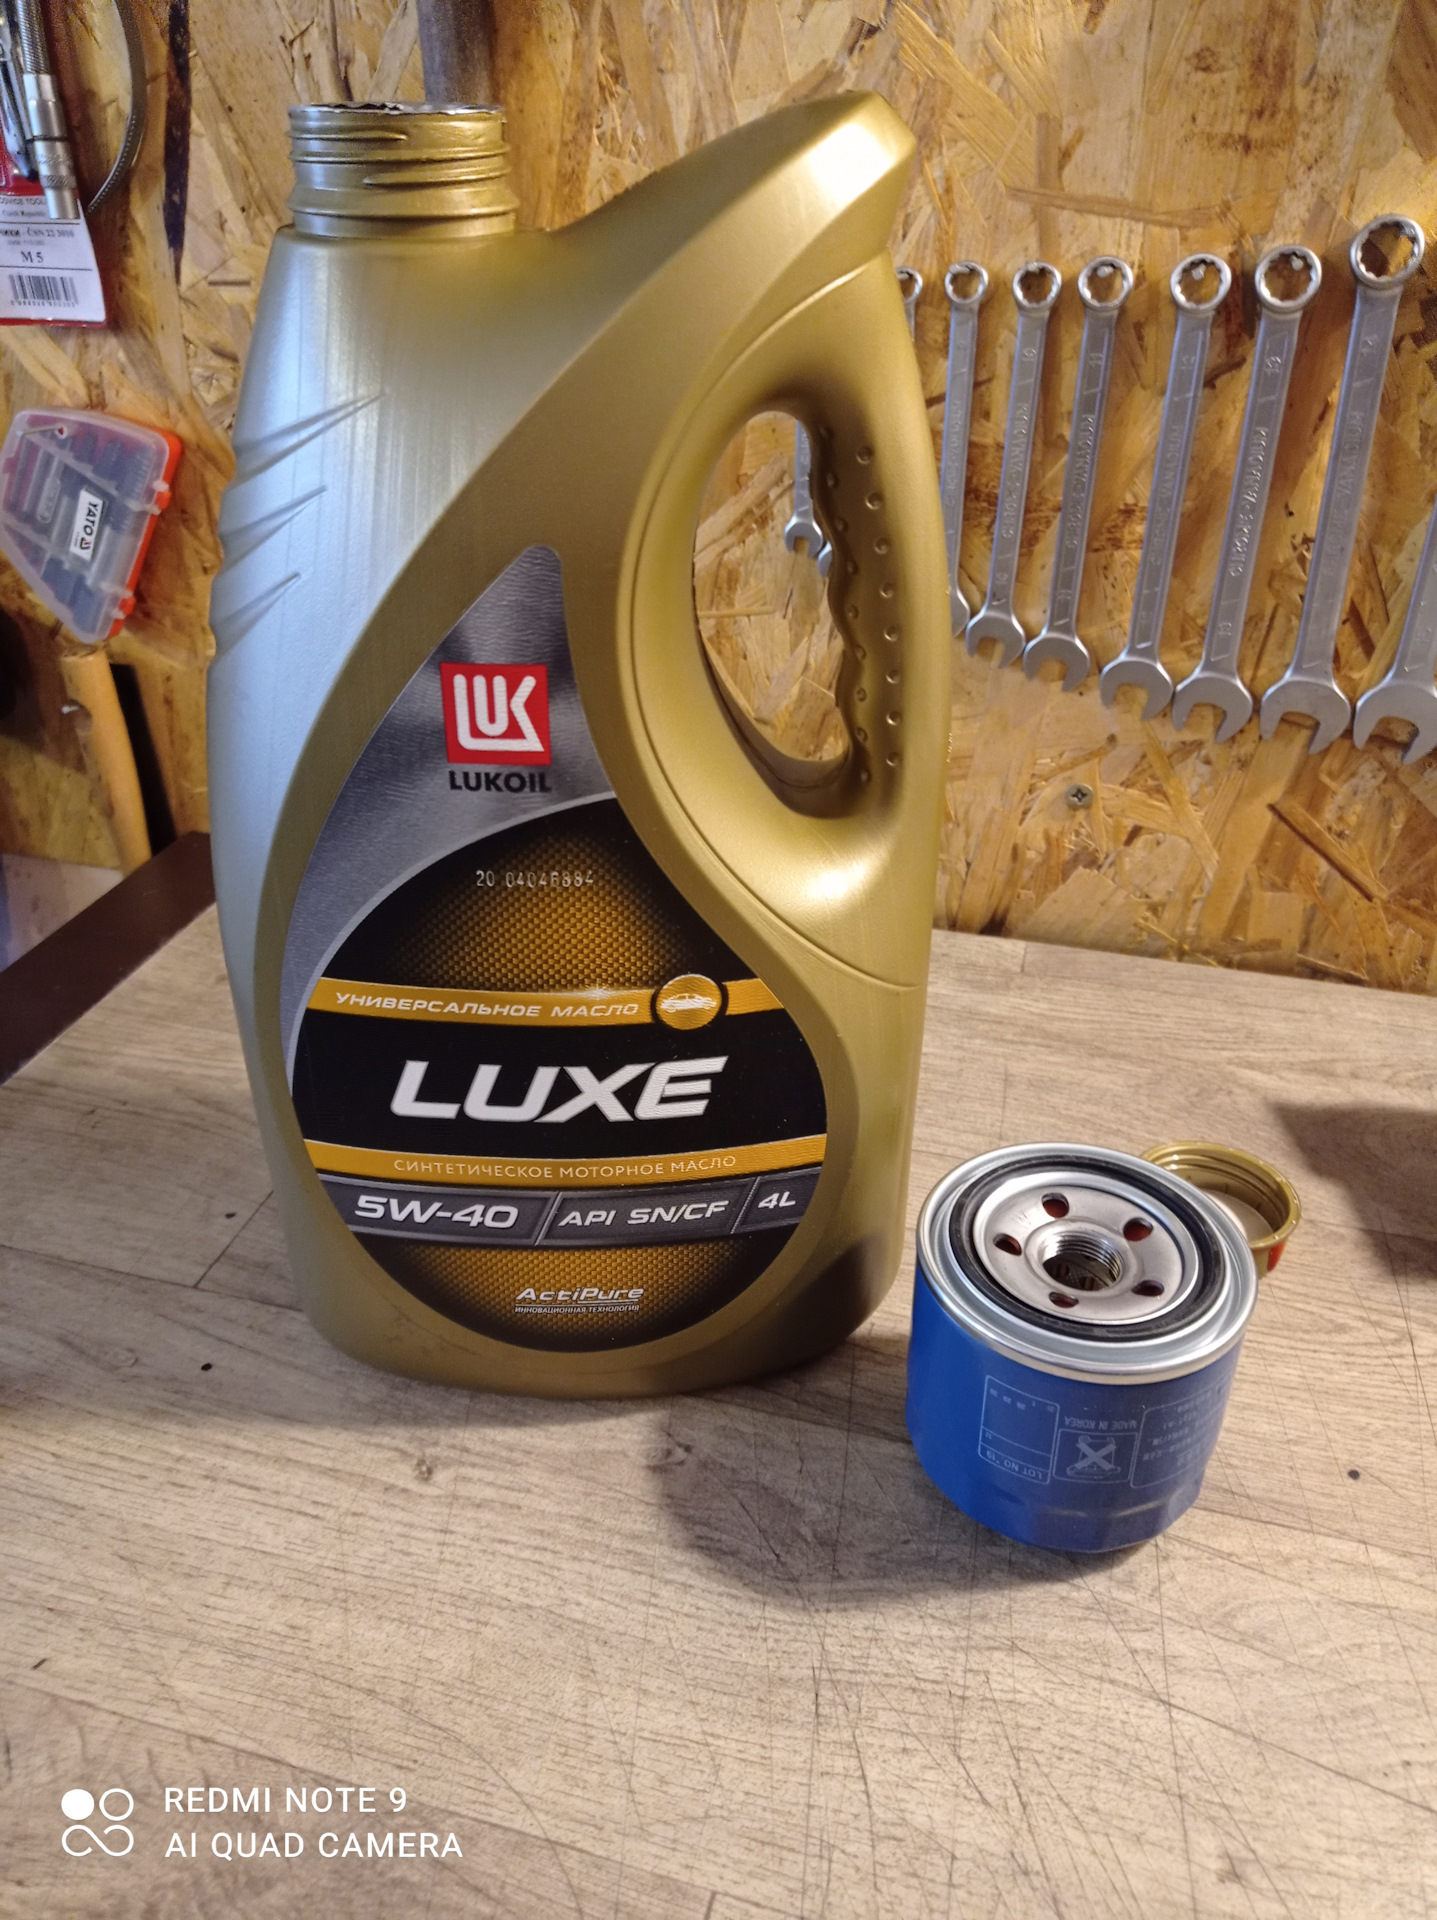 Моторное масло лукойл люкс 5w 40. Масло Lukoil Luxe 5w40. Lukoil Luxe 5w-40. Лукойл Люкс 5w40 2023. Лукойл Люкс 10w 40 в Хендай акцент.